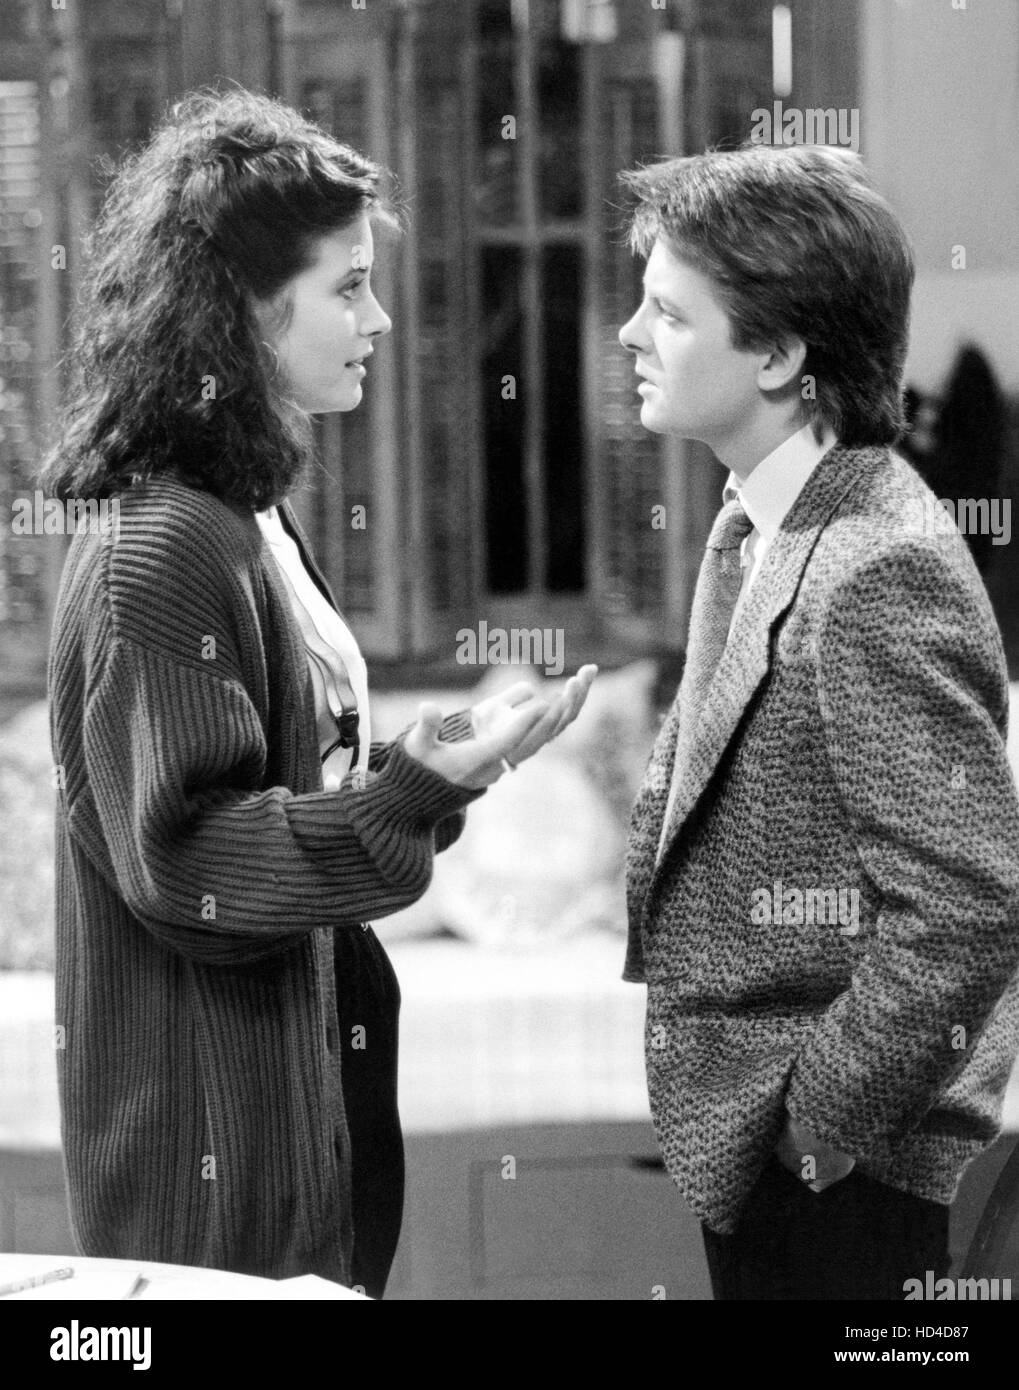 FAMILY TIES, (from left): Courteney Cox, Micheal J. Fox, 1982-89. ©  Paramount Television / Courtesy: Everett Collection Stock Photo - Alamy